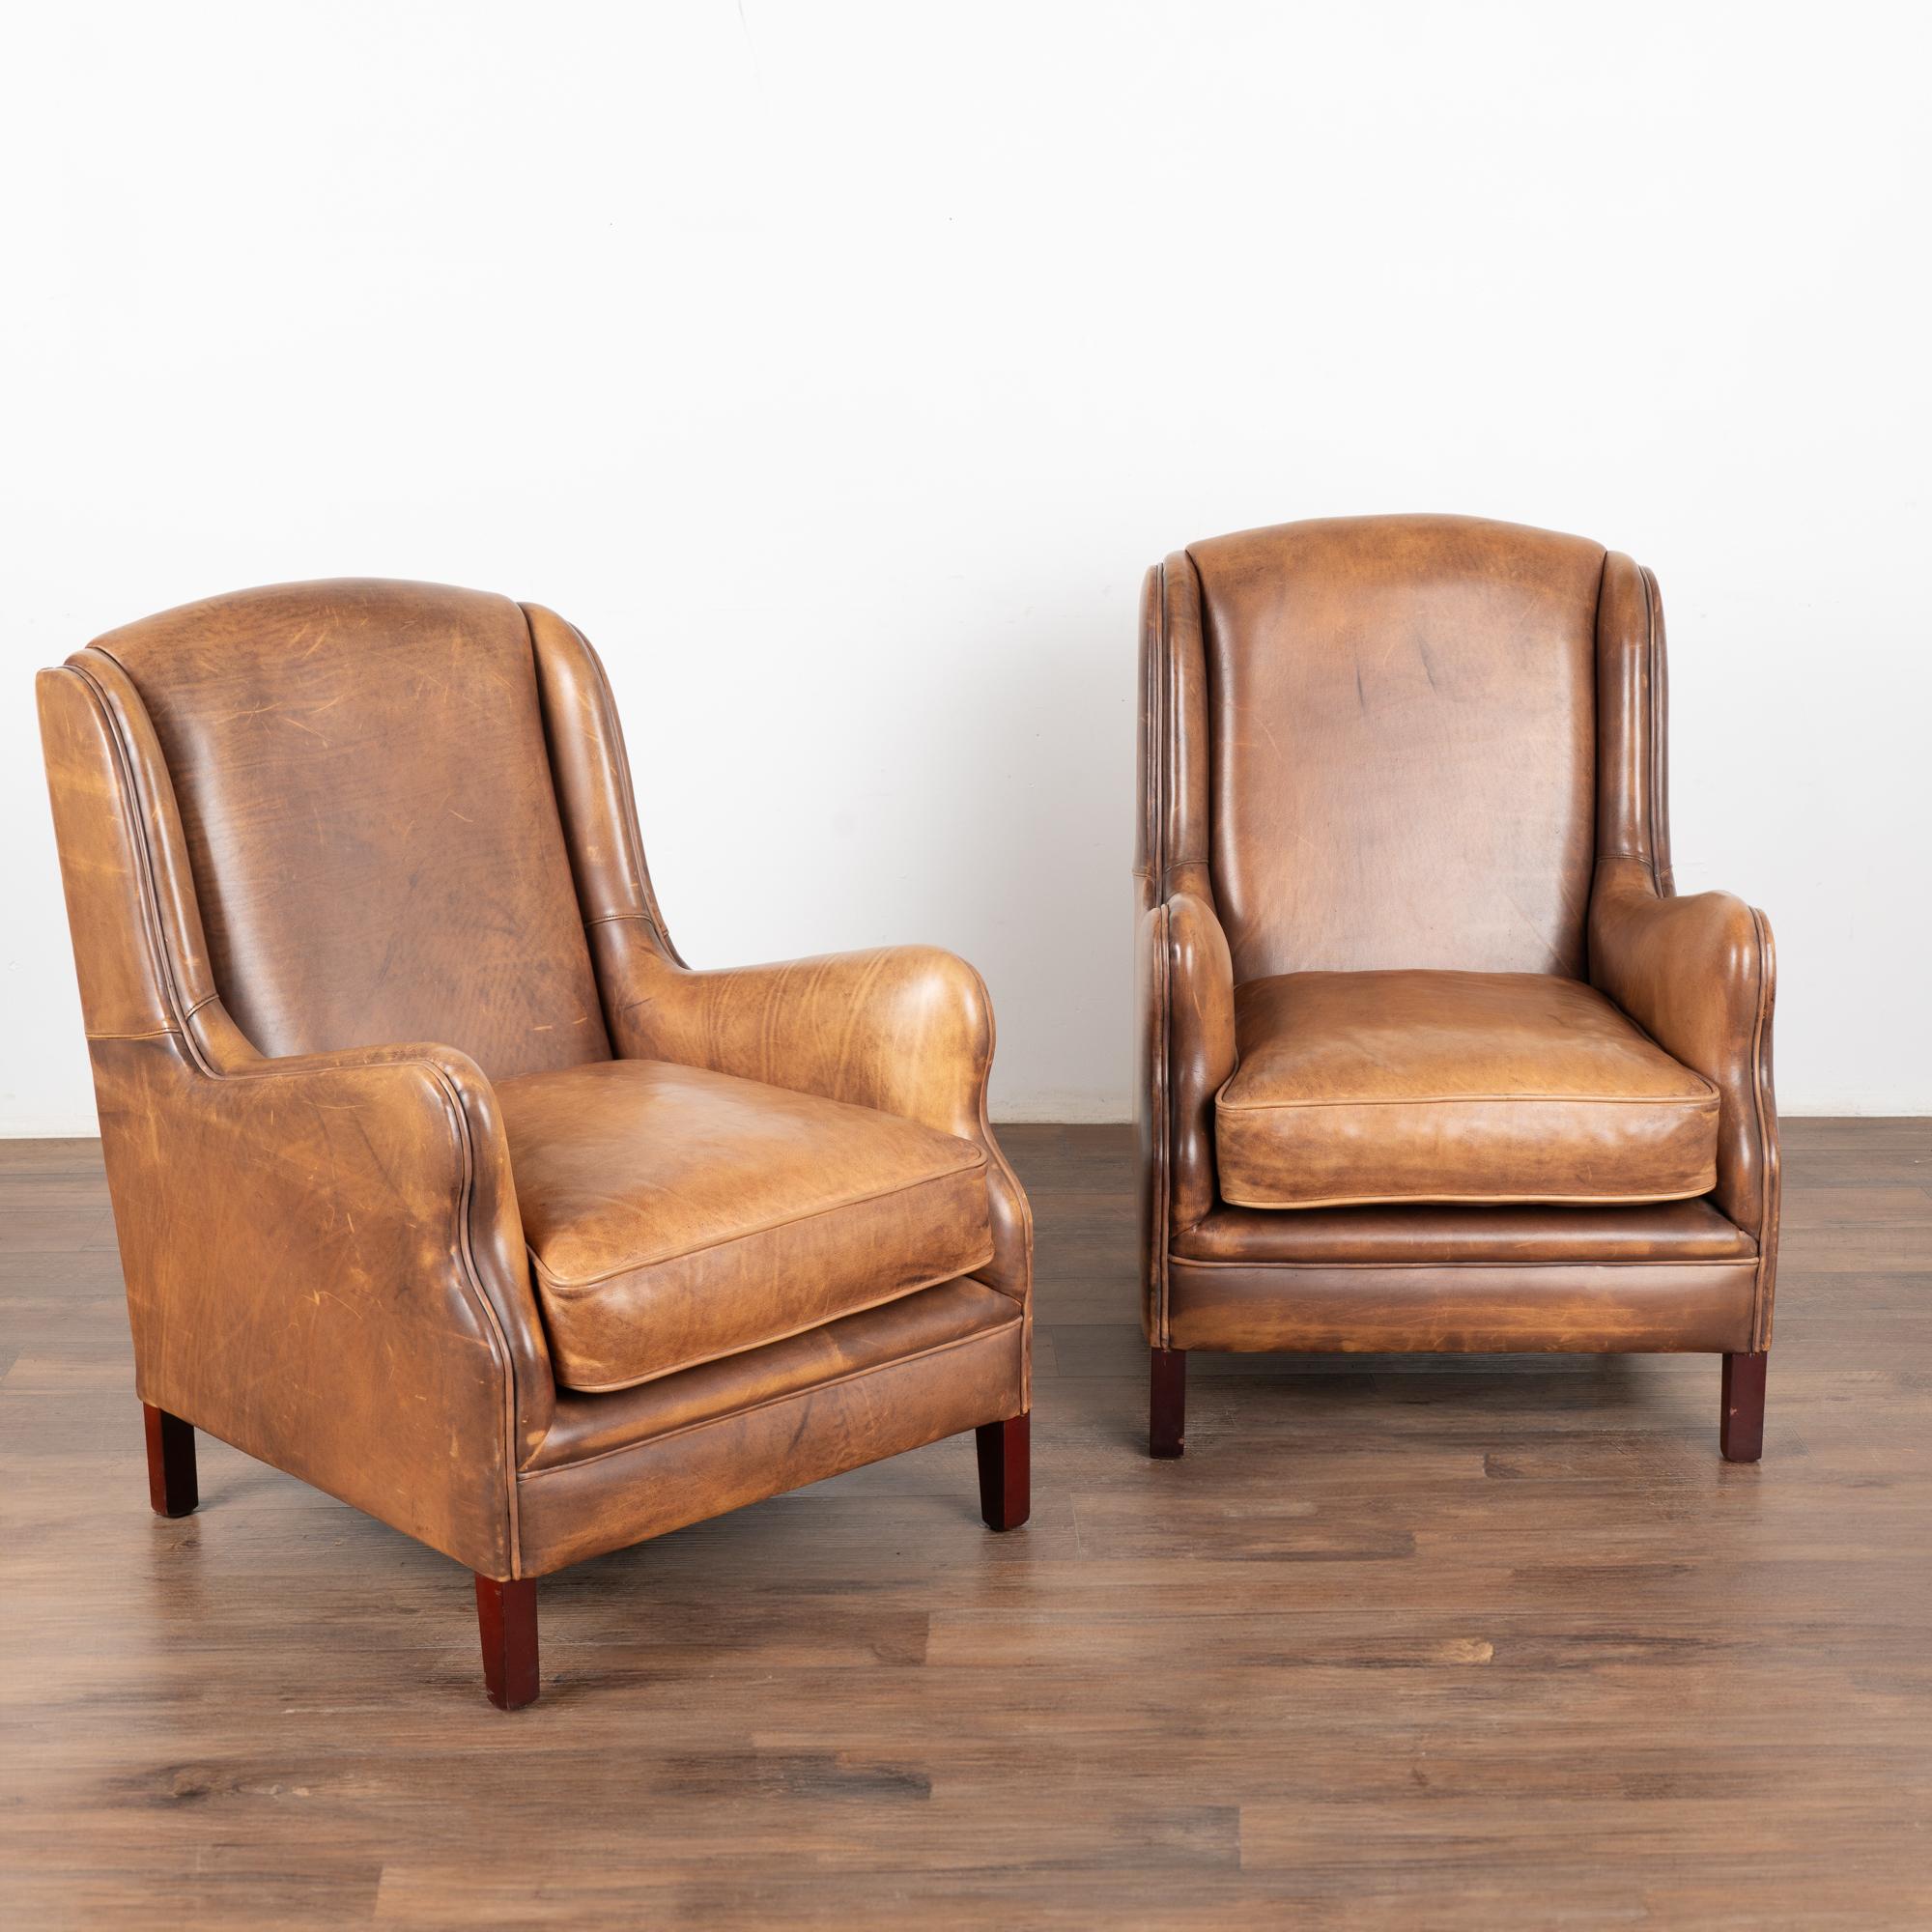 Pair, brown leather arm chairs with hard wood legs. Clean wingback style with stream lined arms and self piping.
Upholstered in smooth vintage brown leather with rich patina.
Sold in original vintage condition; solid/stable and sits